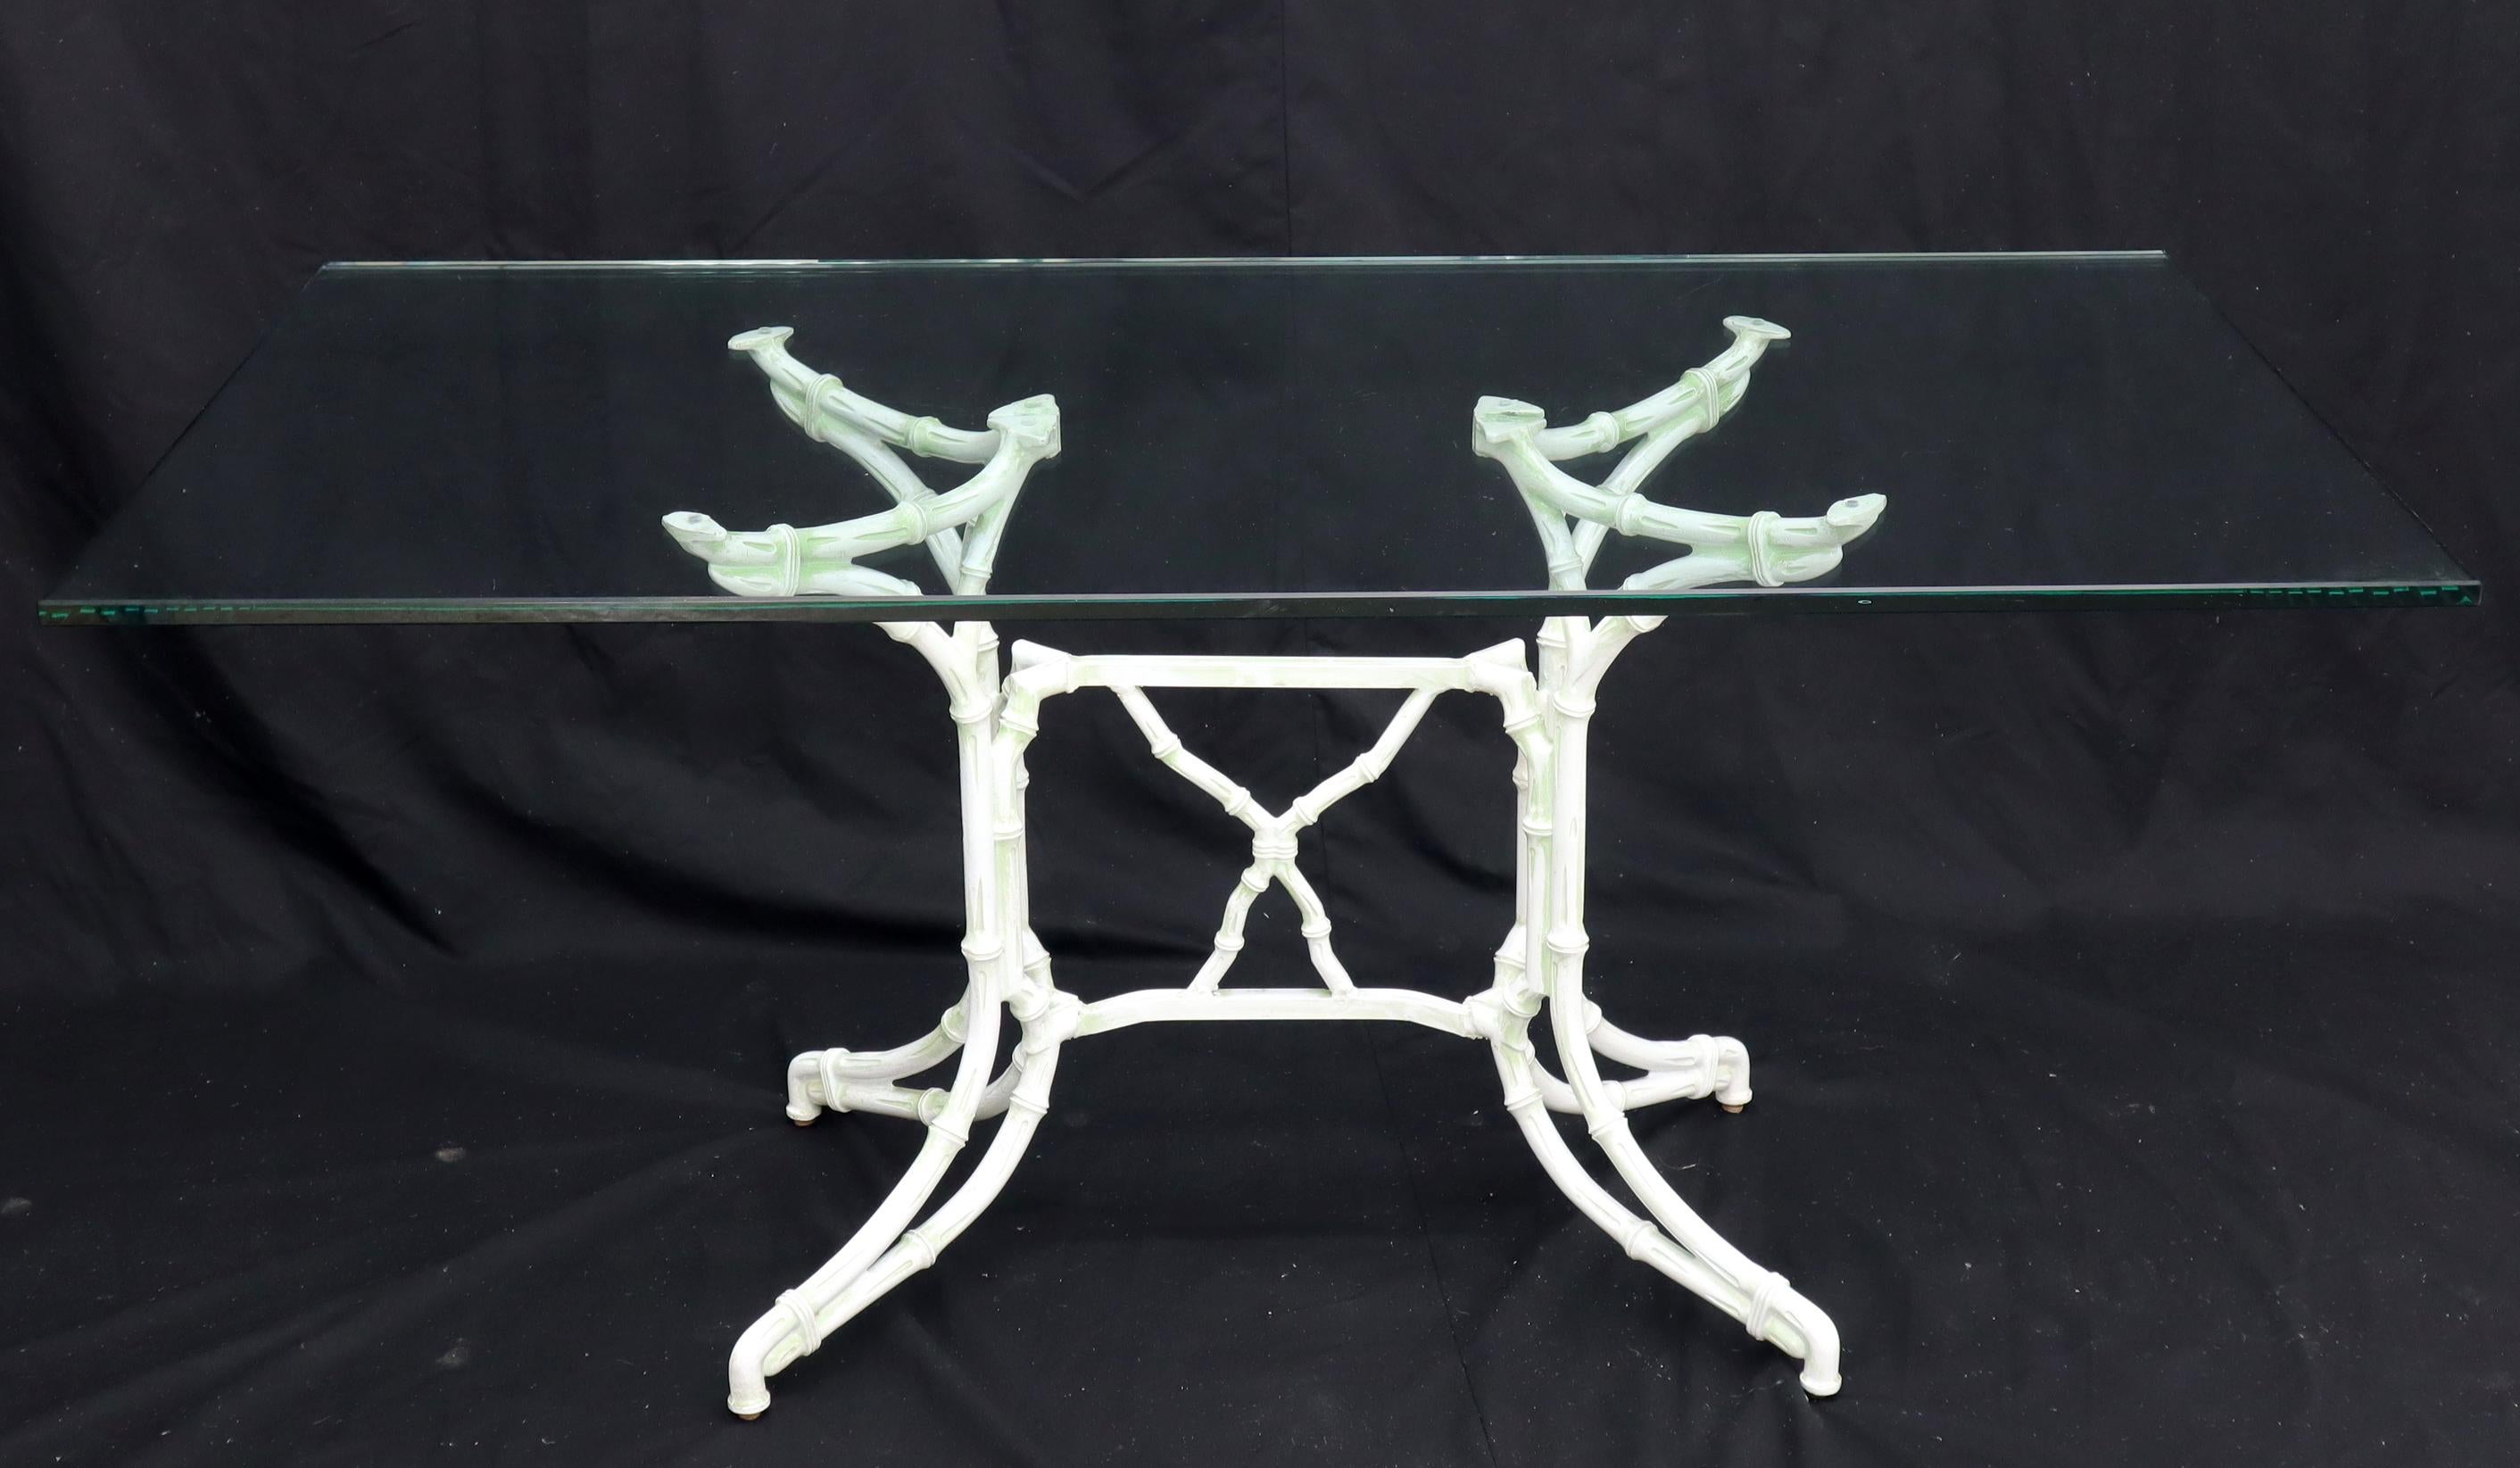 Cast Aluminum Faux Bamboo Dining Table w/ 4 Matching Chairs Outdoors Green Vinyl In Good Condition For Sale In Rockaway, NJ